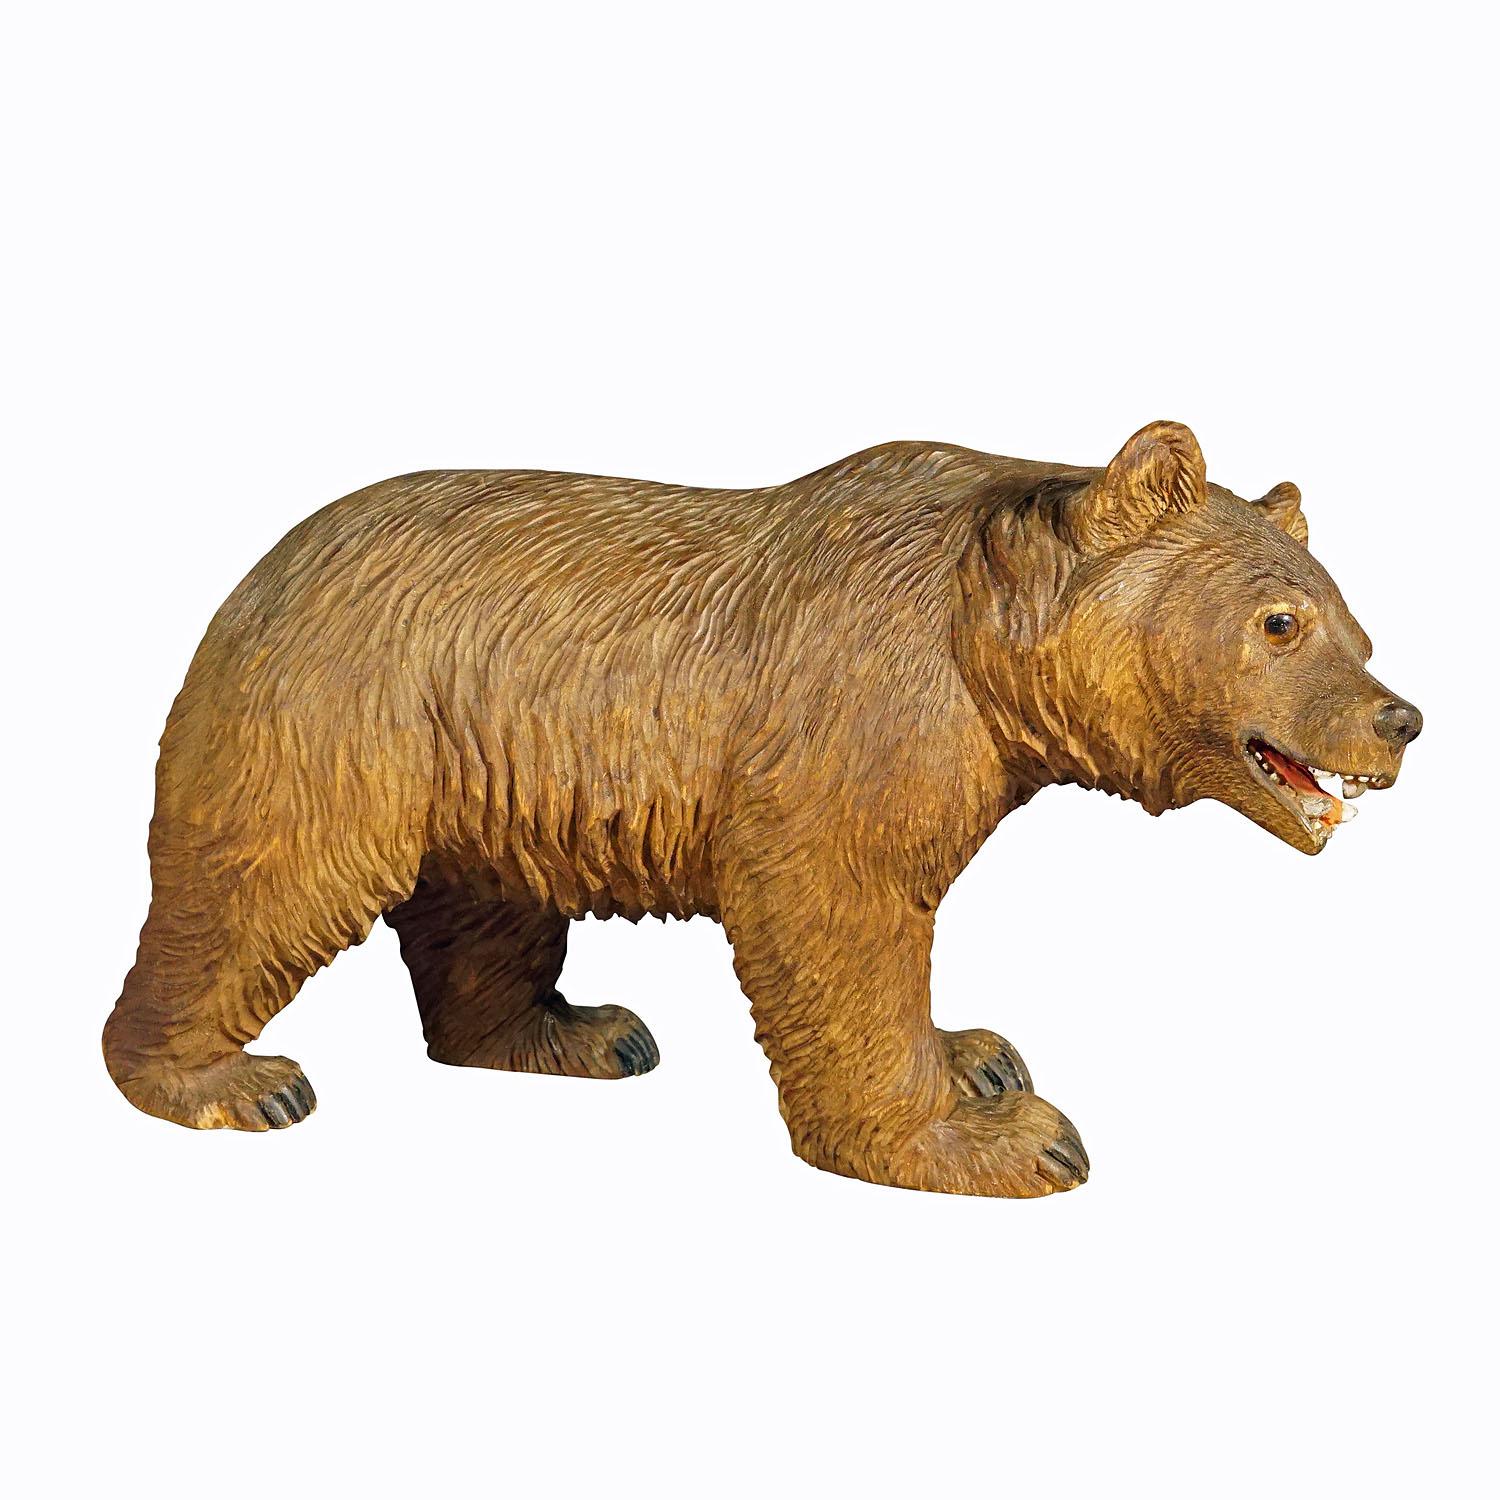 Wooden Statue of a Walking Bear Handcarved in Switzerland circa 1930s.

A vintage statue of a strolling bear. Made of lindenwood, finely handcarved and handpainted with naturalistic details in Brienz, Switzerland ca. 1930s. A nice example of the